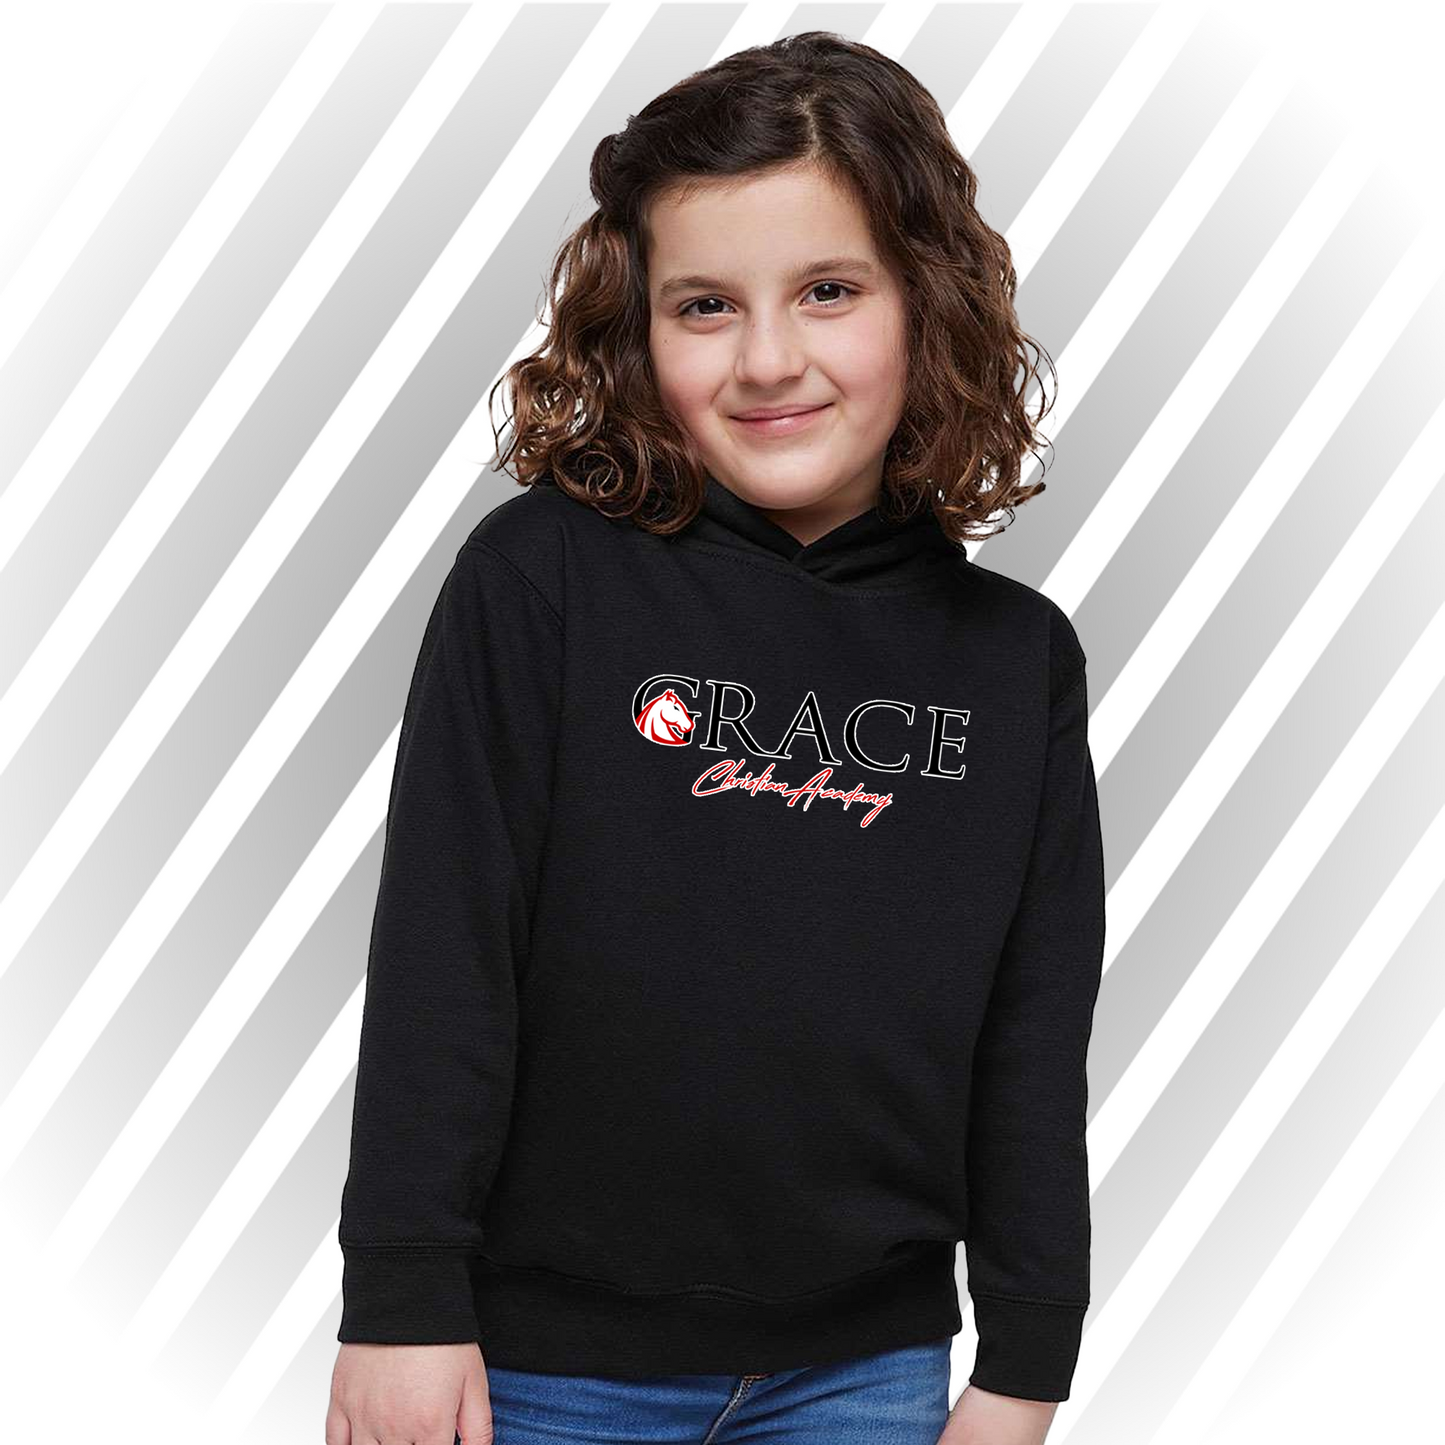 Grace Christian Academy - Toddler Hoodie